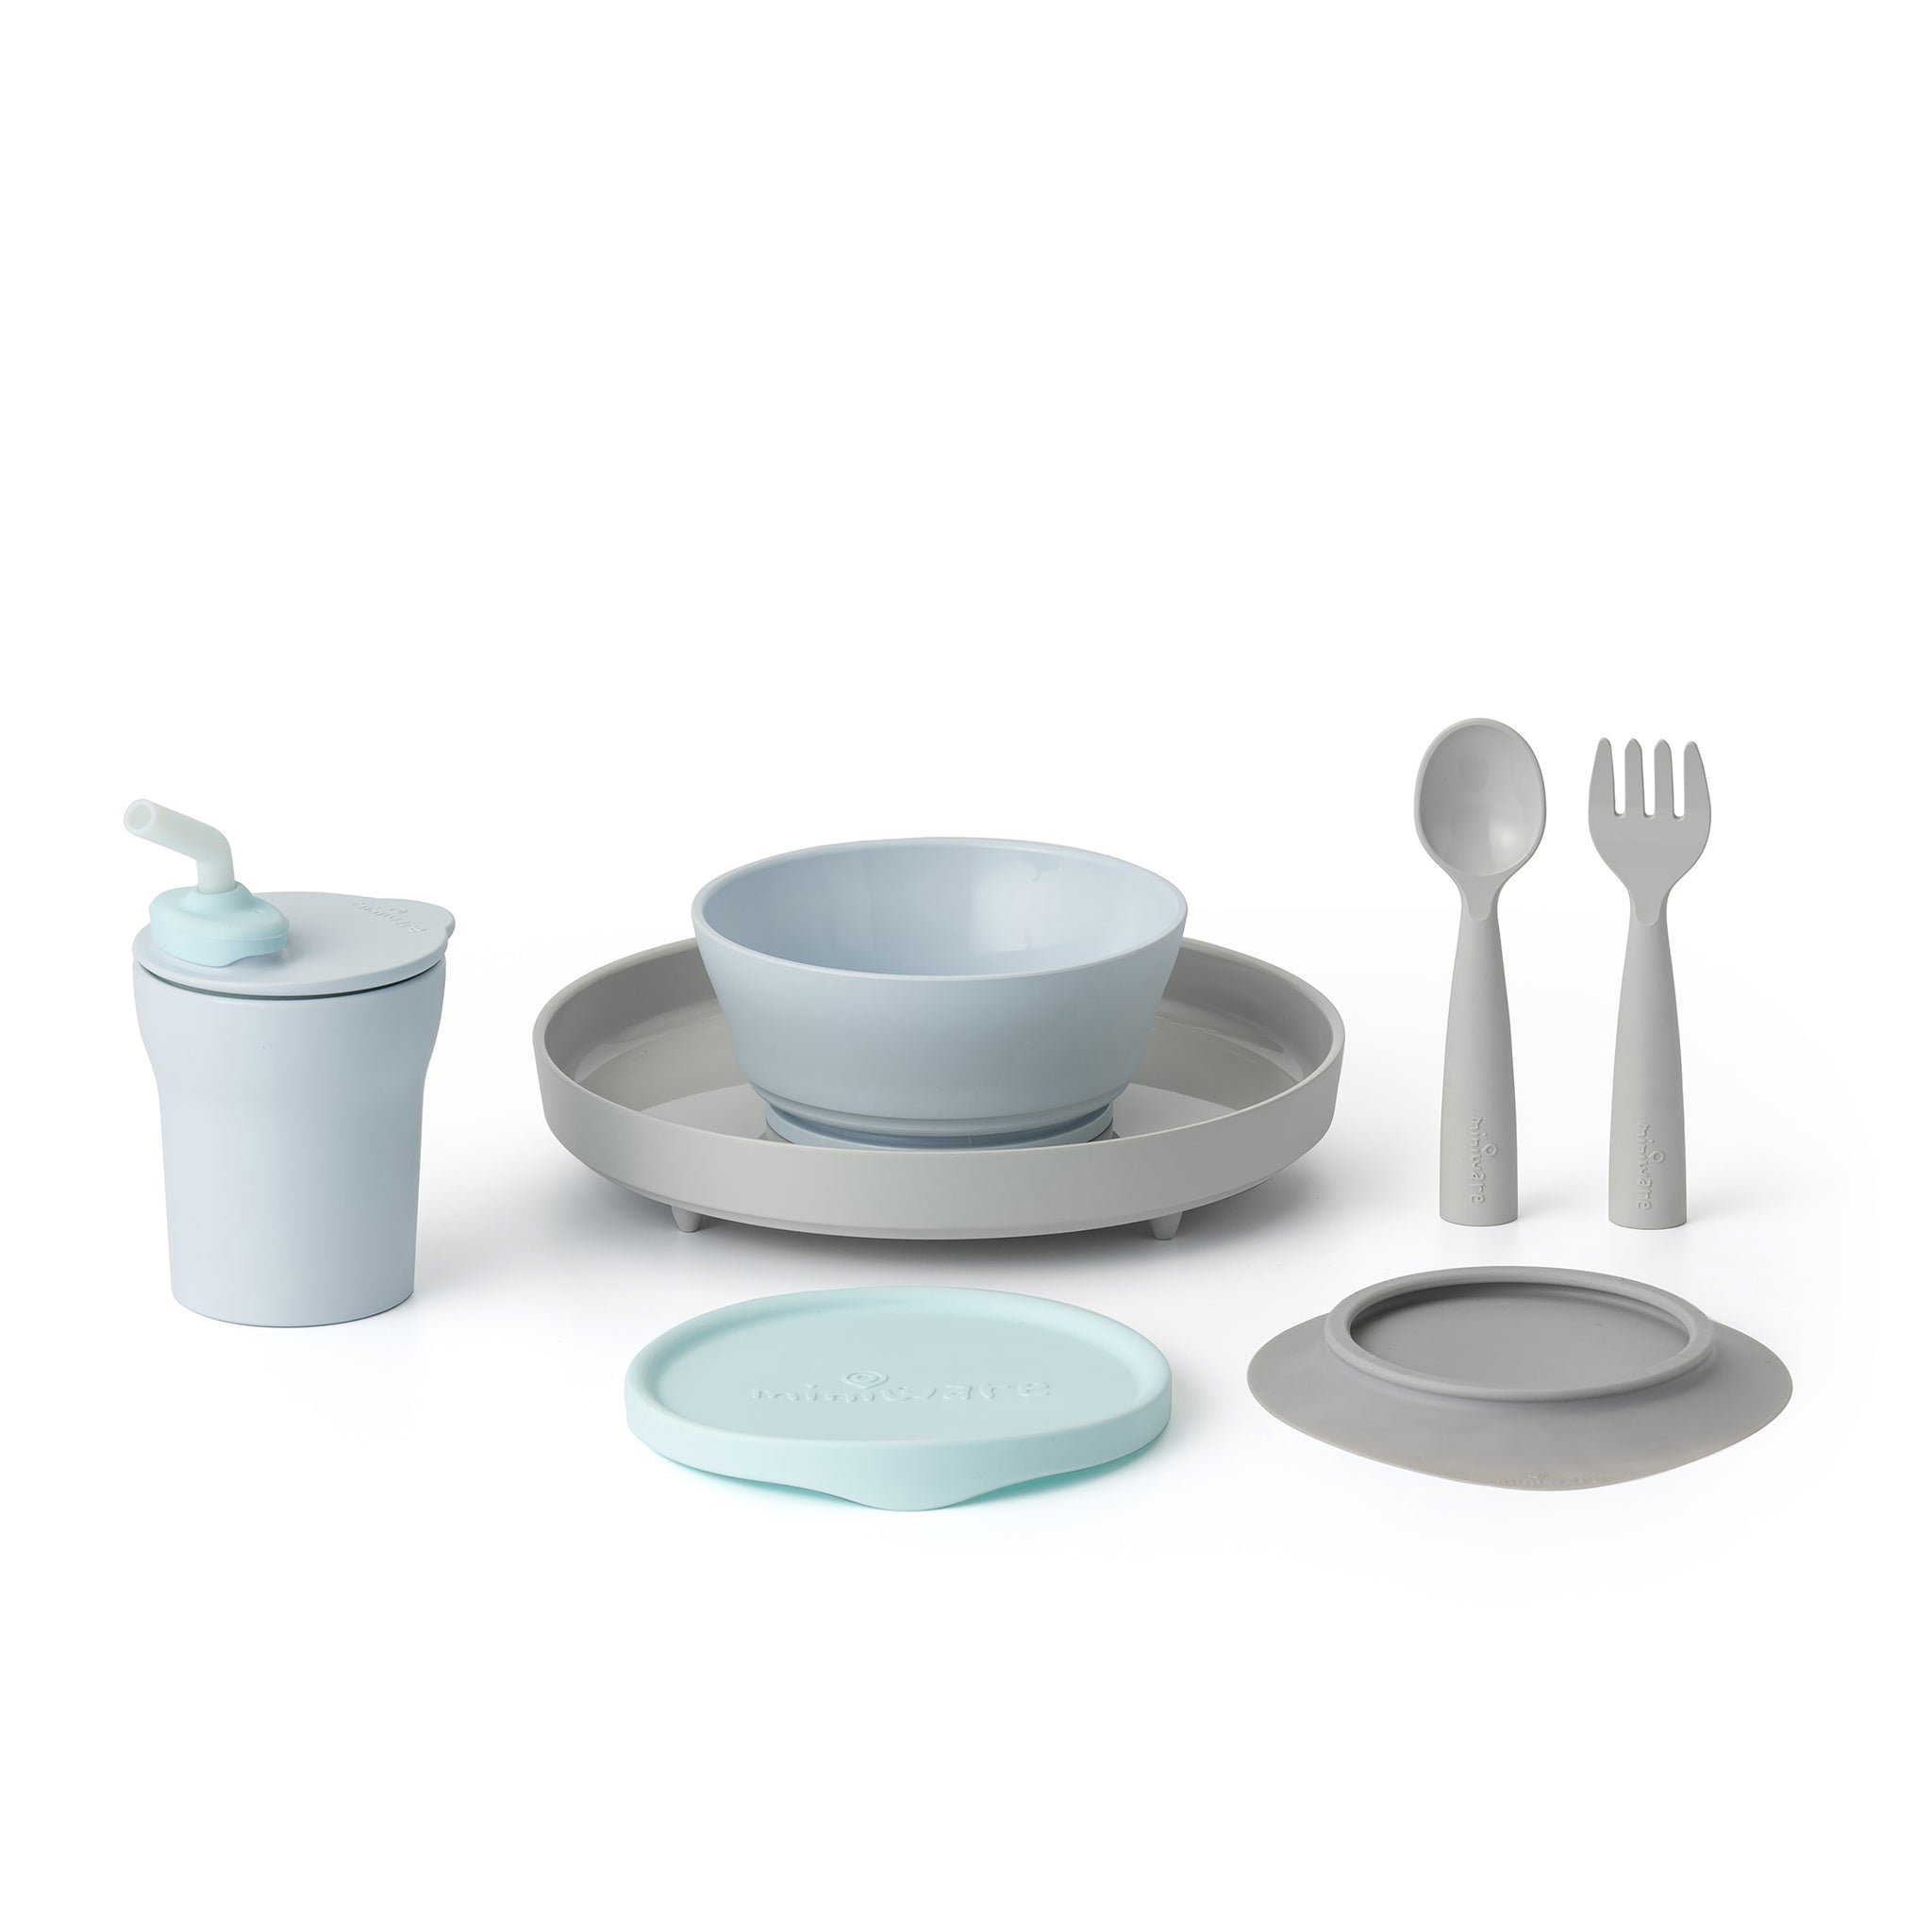 Miniware Little Foodie set (Assorted Colours)